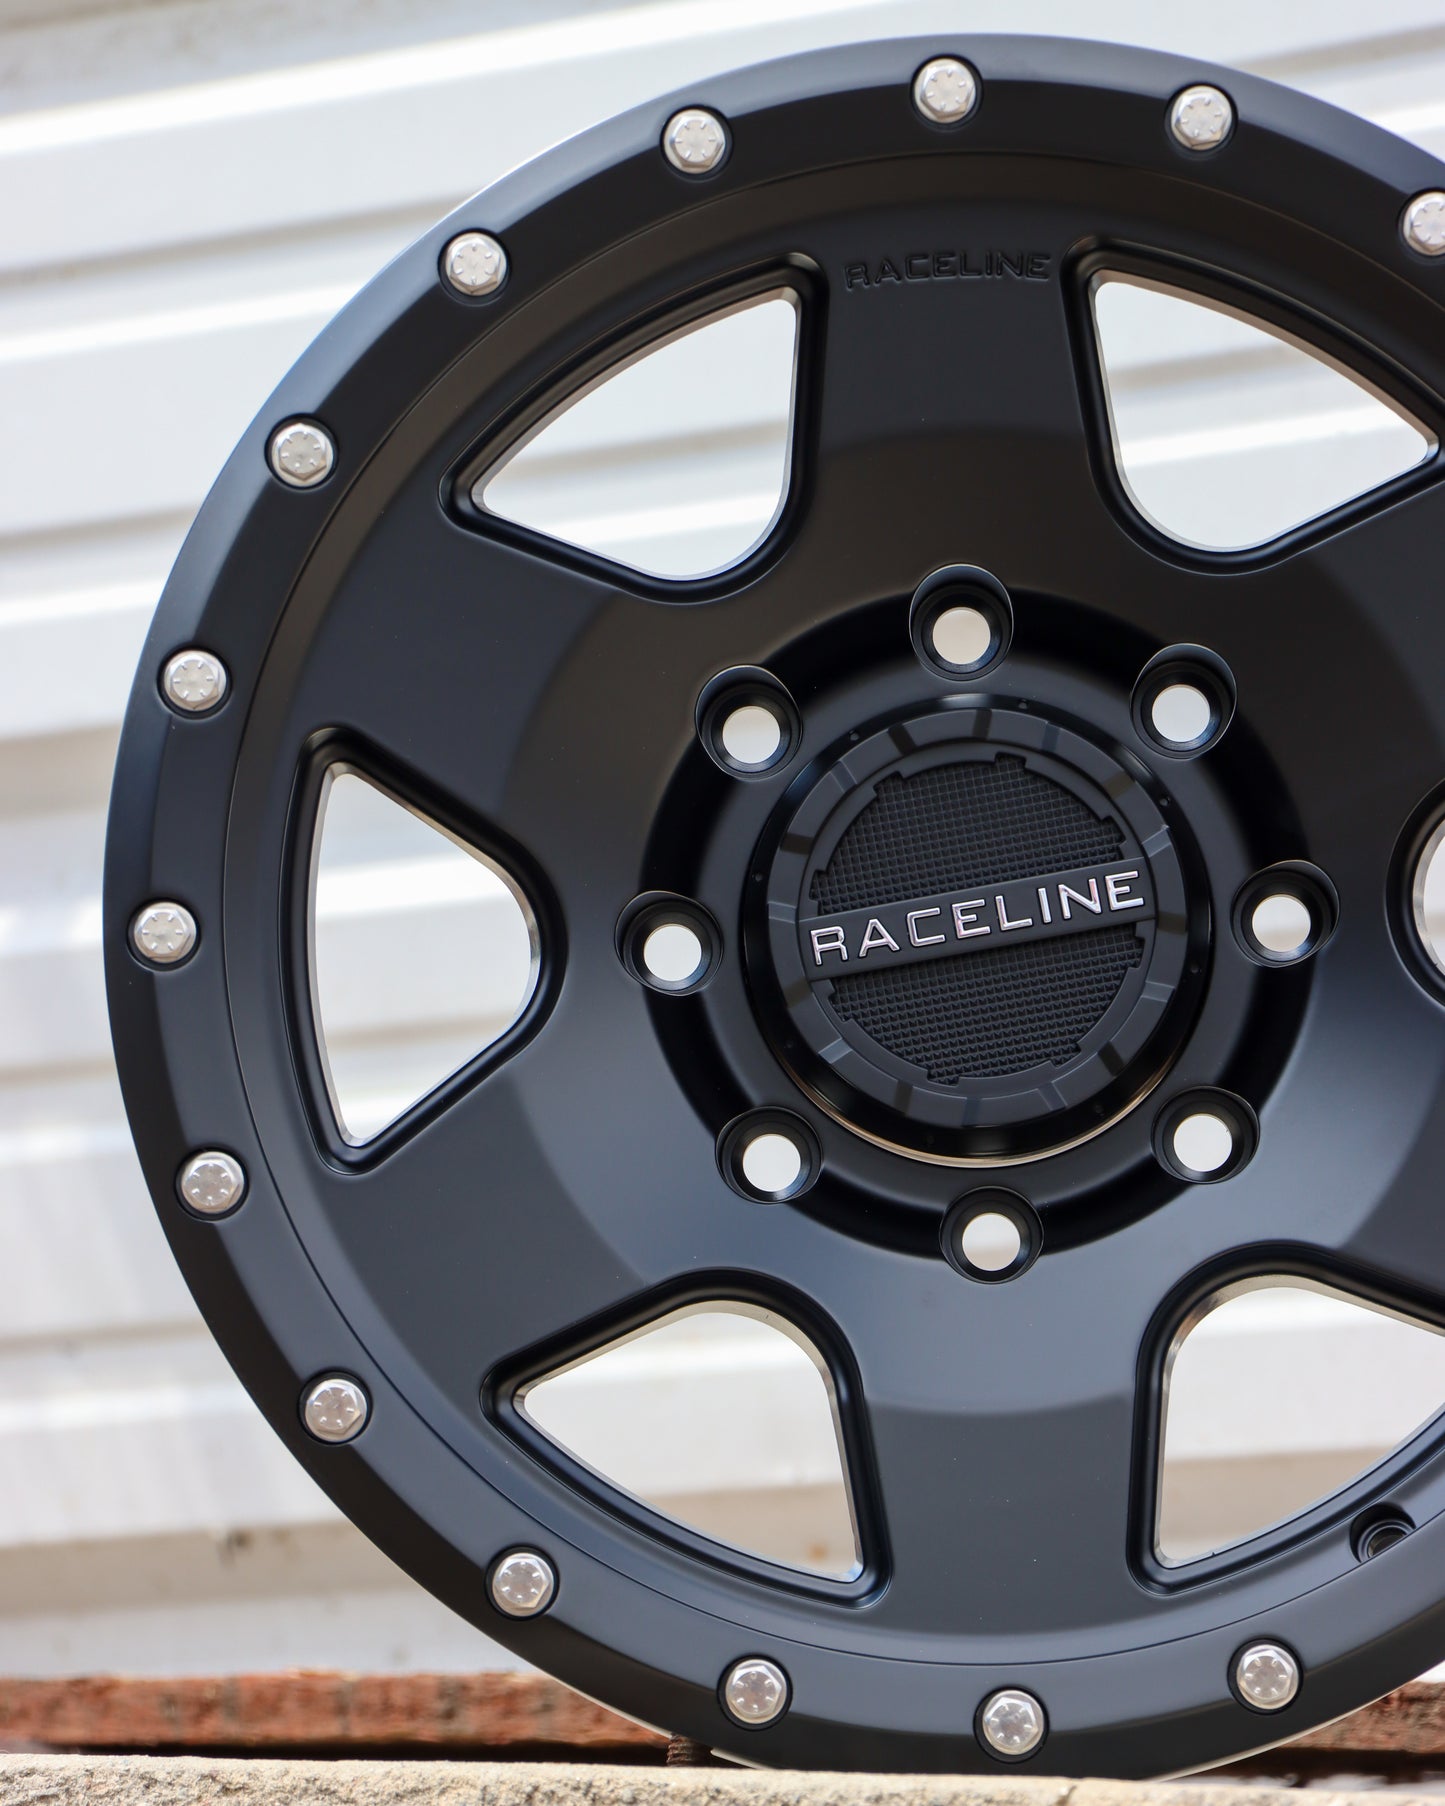 Close-up of the Raceline Boost wheel in a matte black finish.